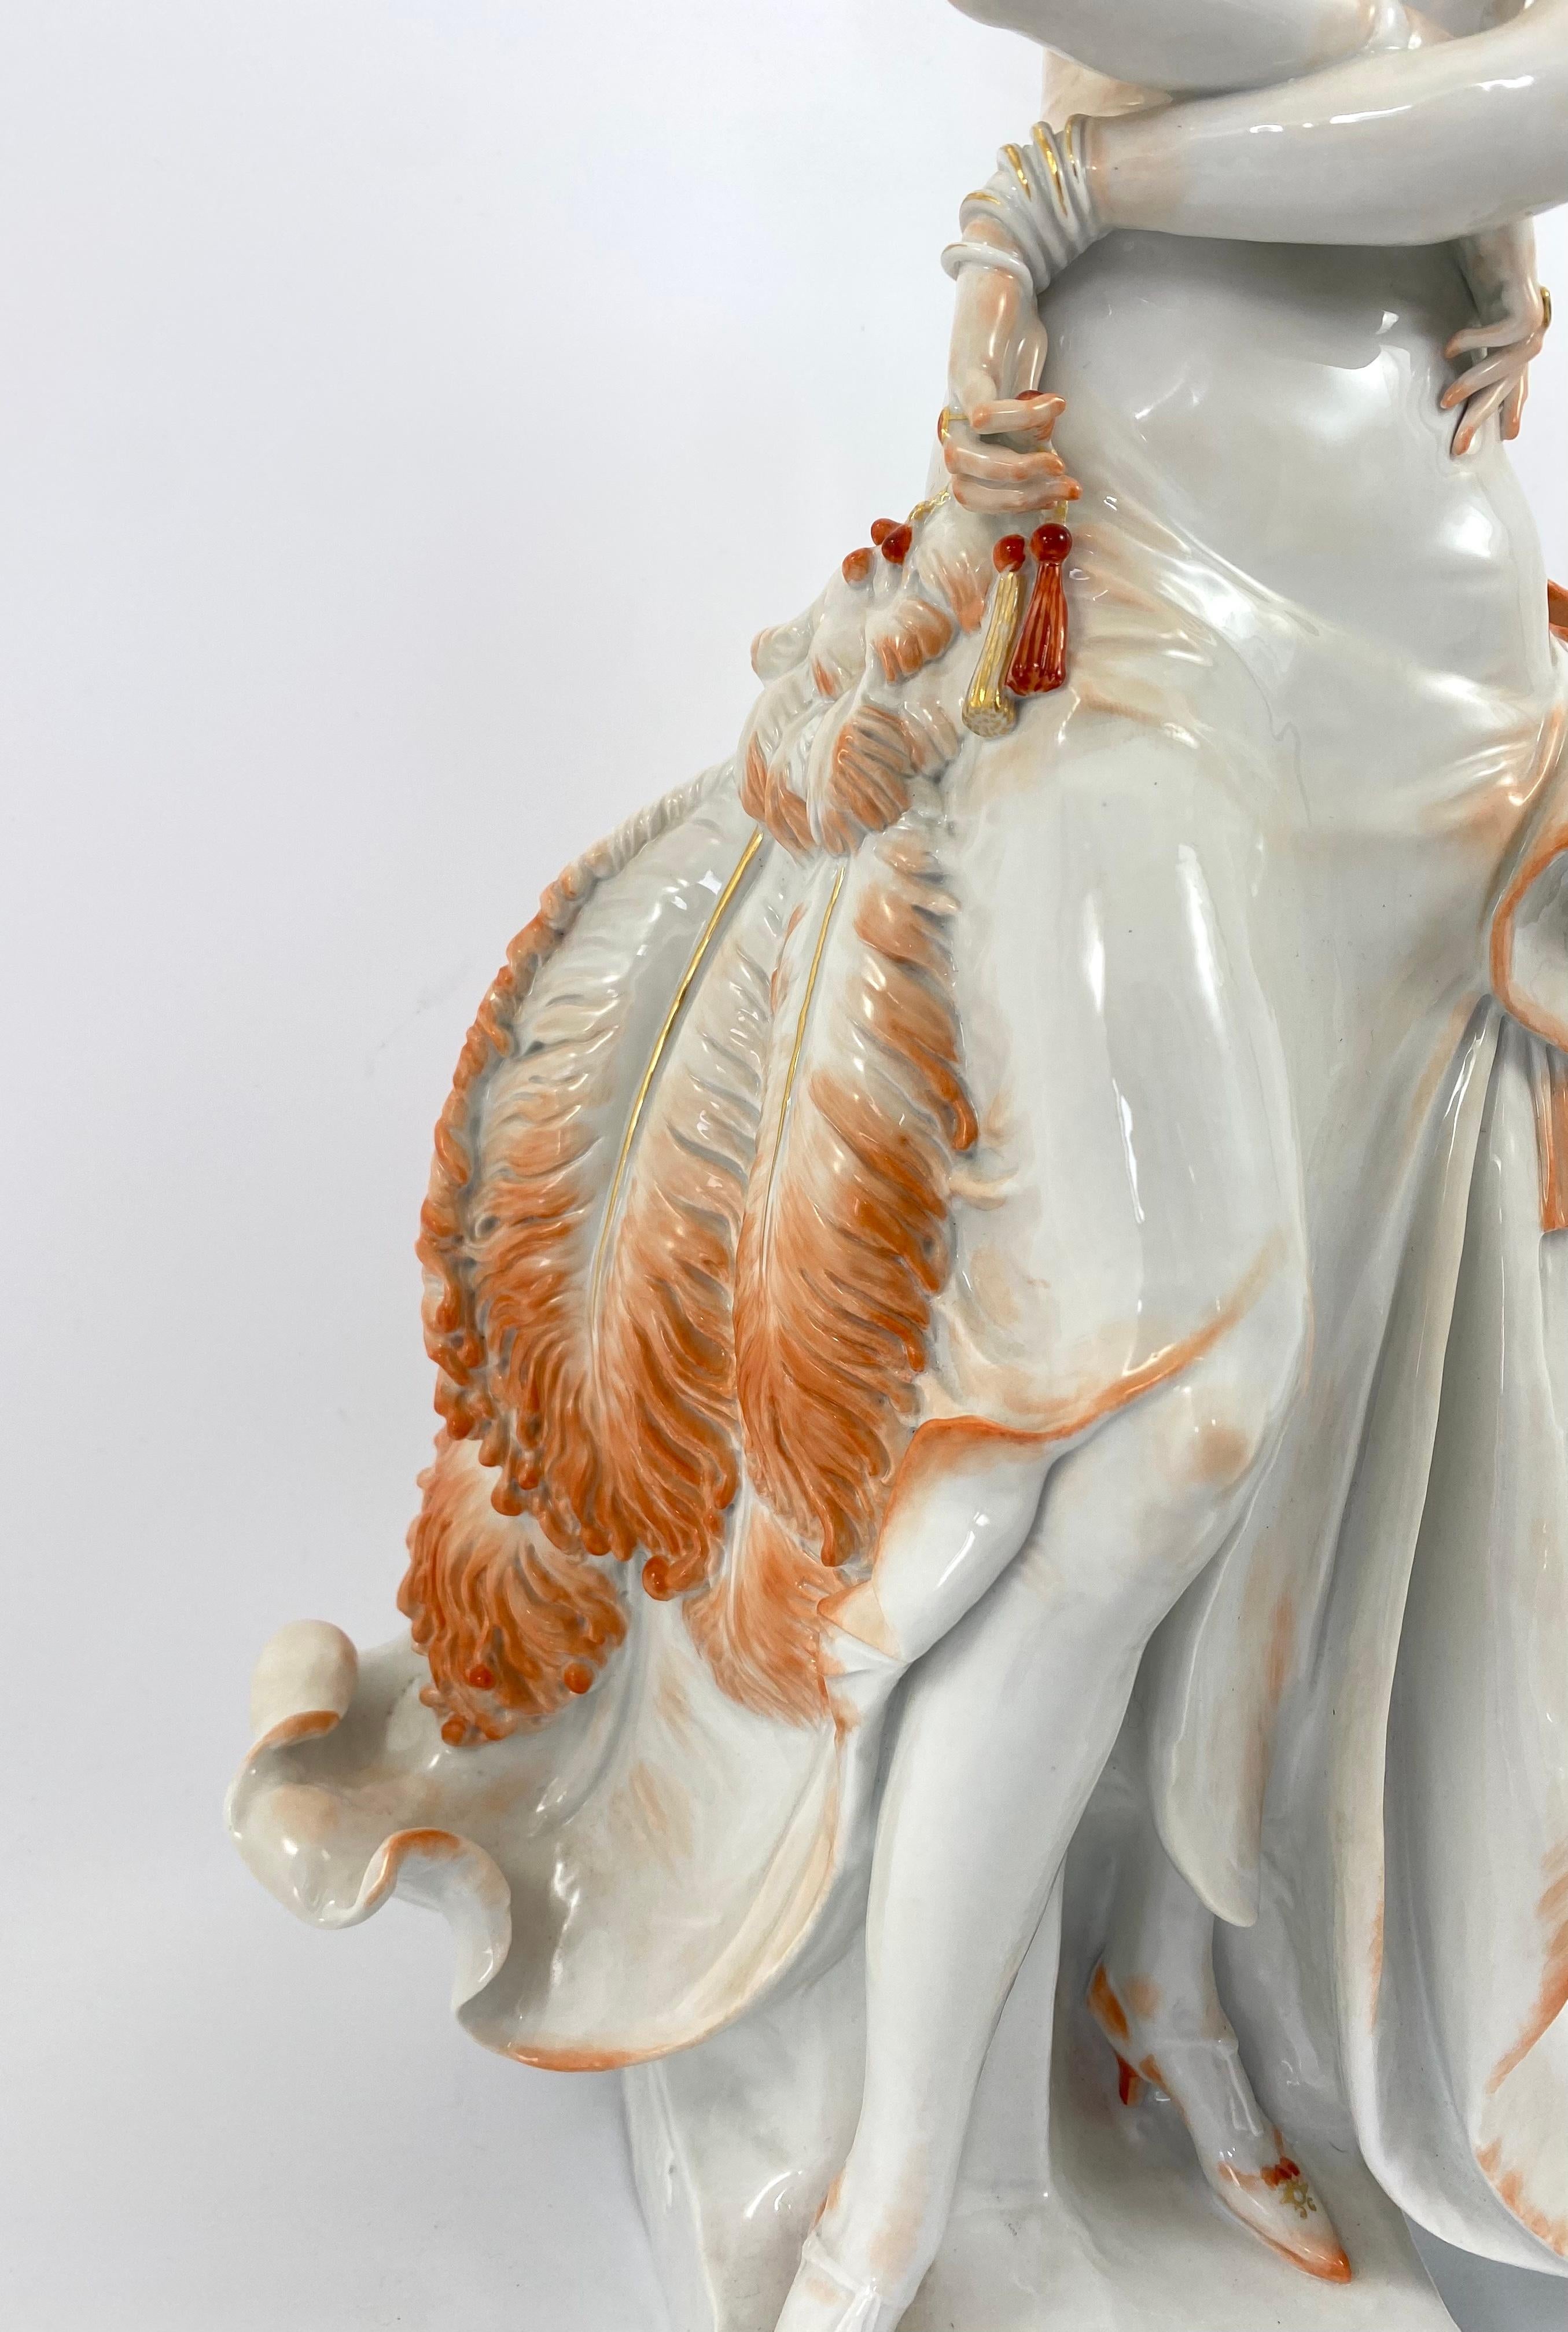 Meissen porcelain figure ‘Dame mit Faecher’, modelled by Professor Paul Sceurich, in 1929.
The elegant lady having short, waved hair, wearing an evening dress designed to accentuate her figure, and carries a large ostrich feather fan in her left